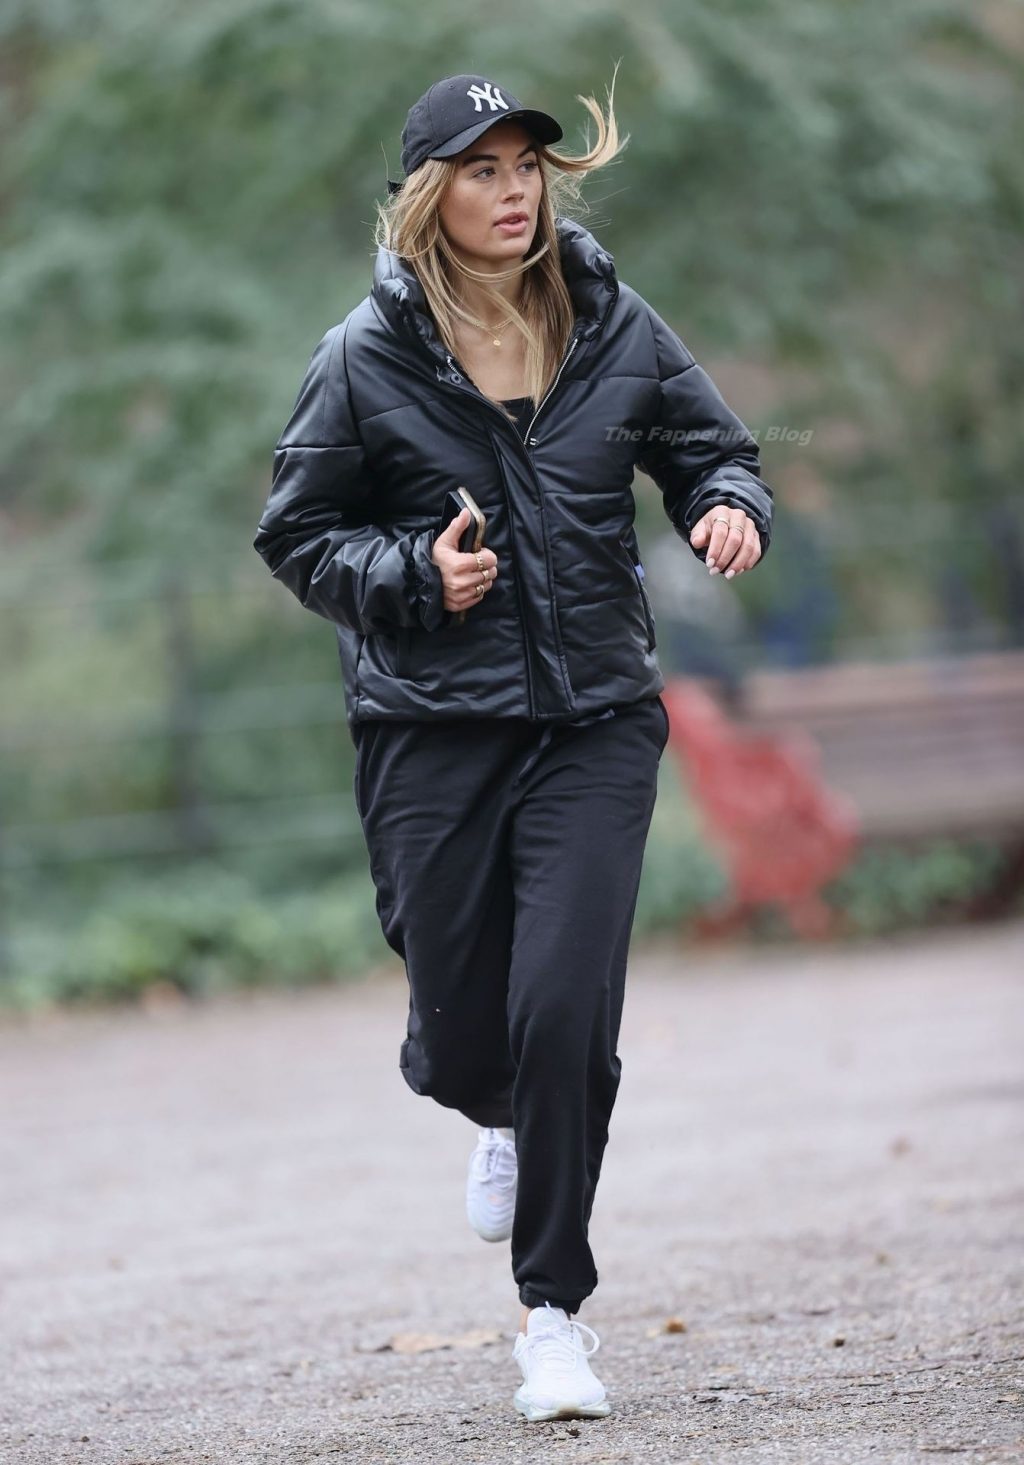 Arabella Chi Exercises at a London Park Wearing Pretty Little Thing (57 Photos)